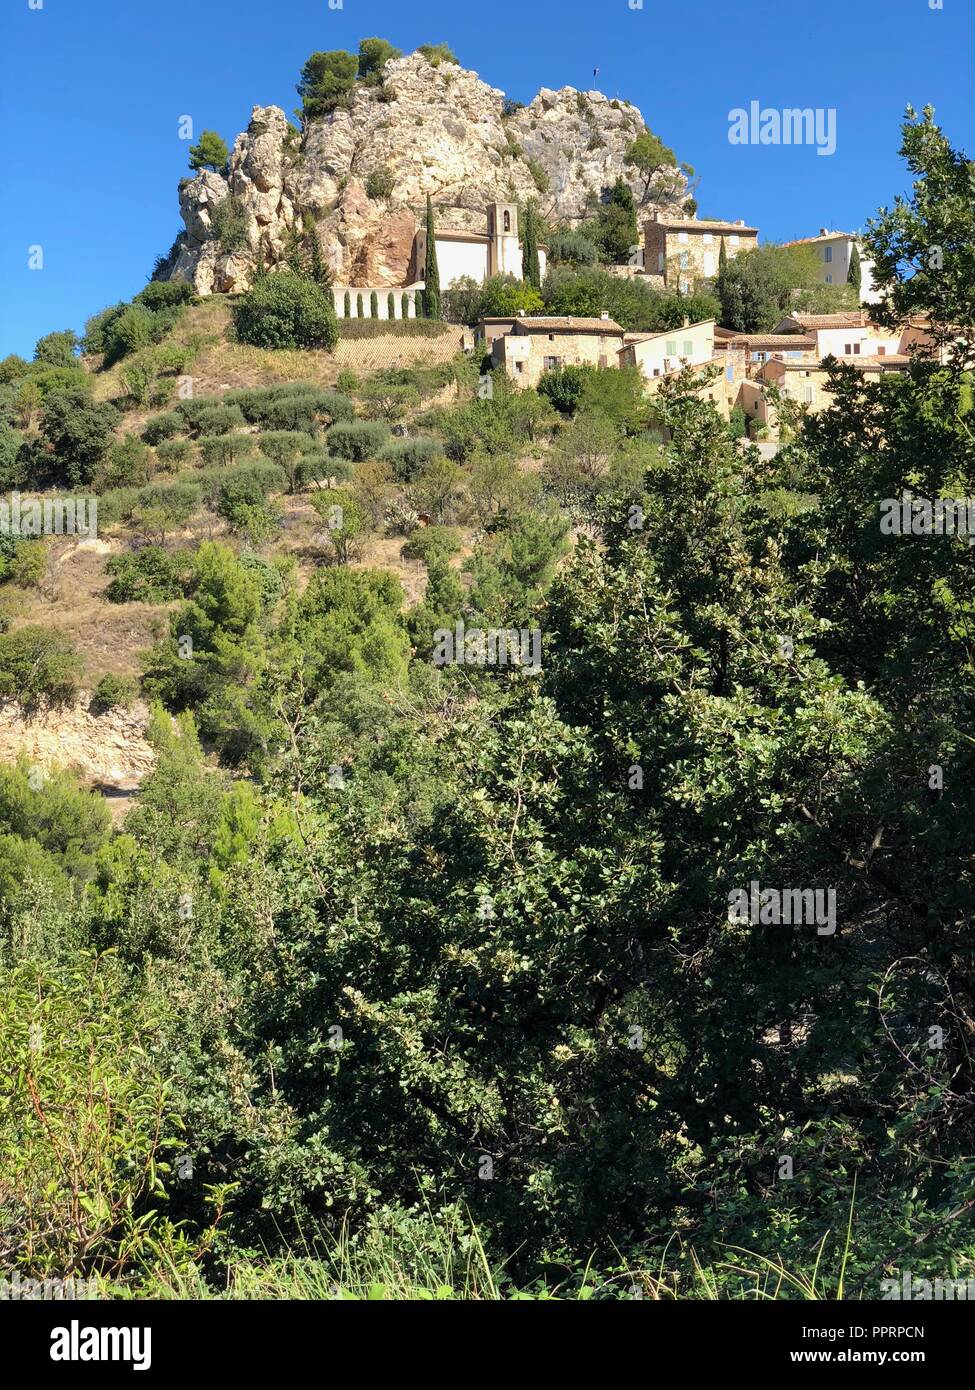 Hilltop town of Suzette in Provence, France Stock Photo